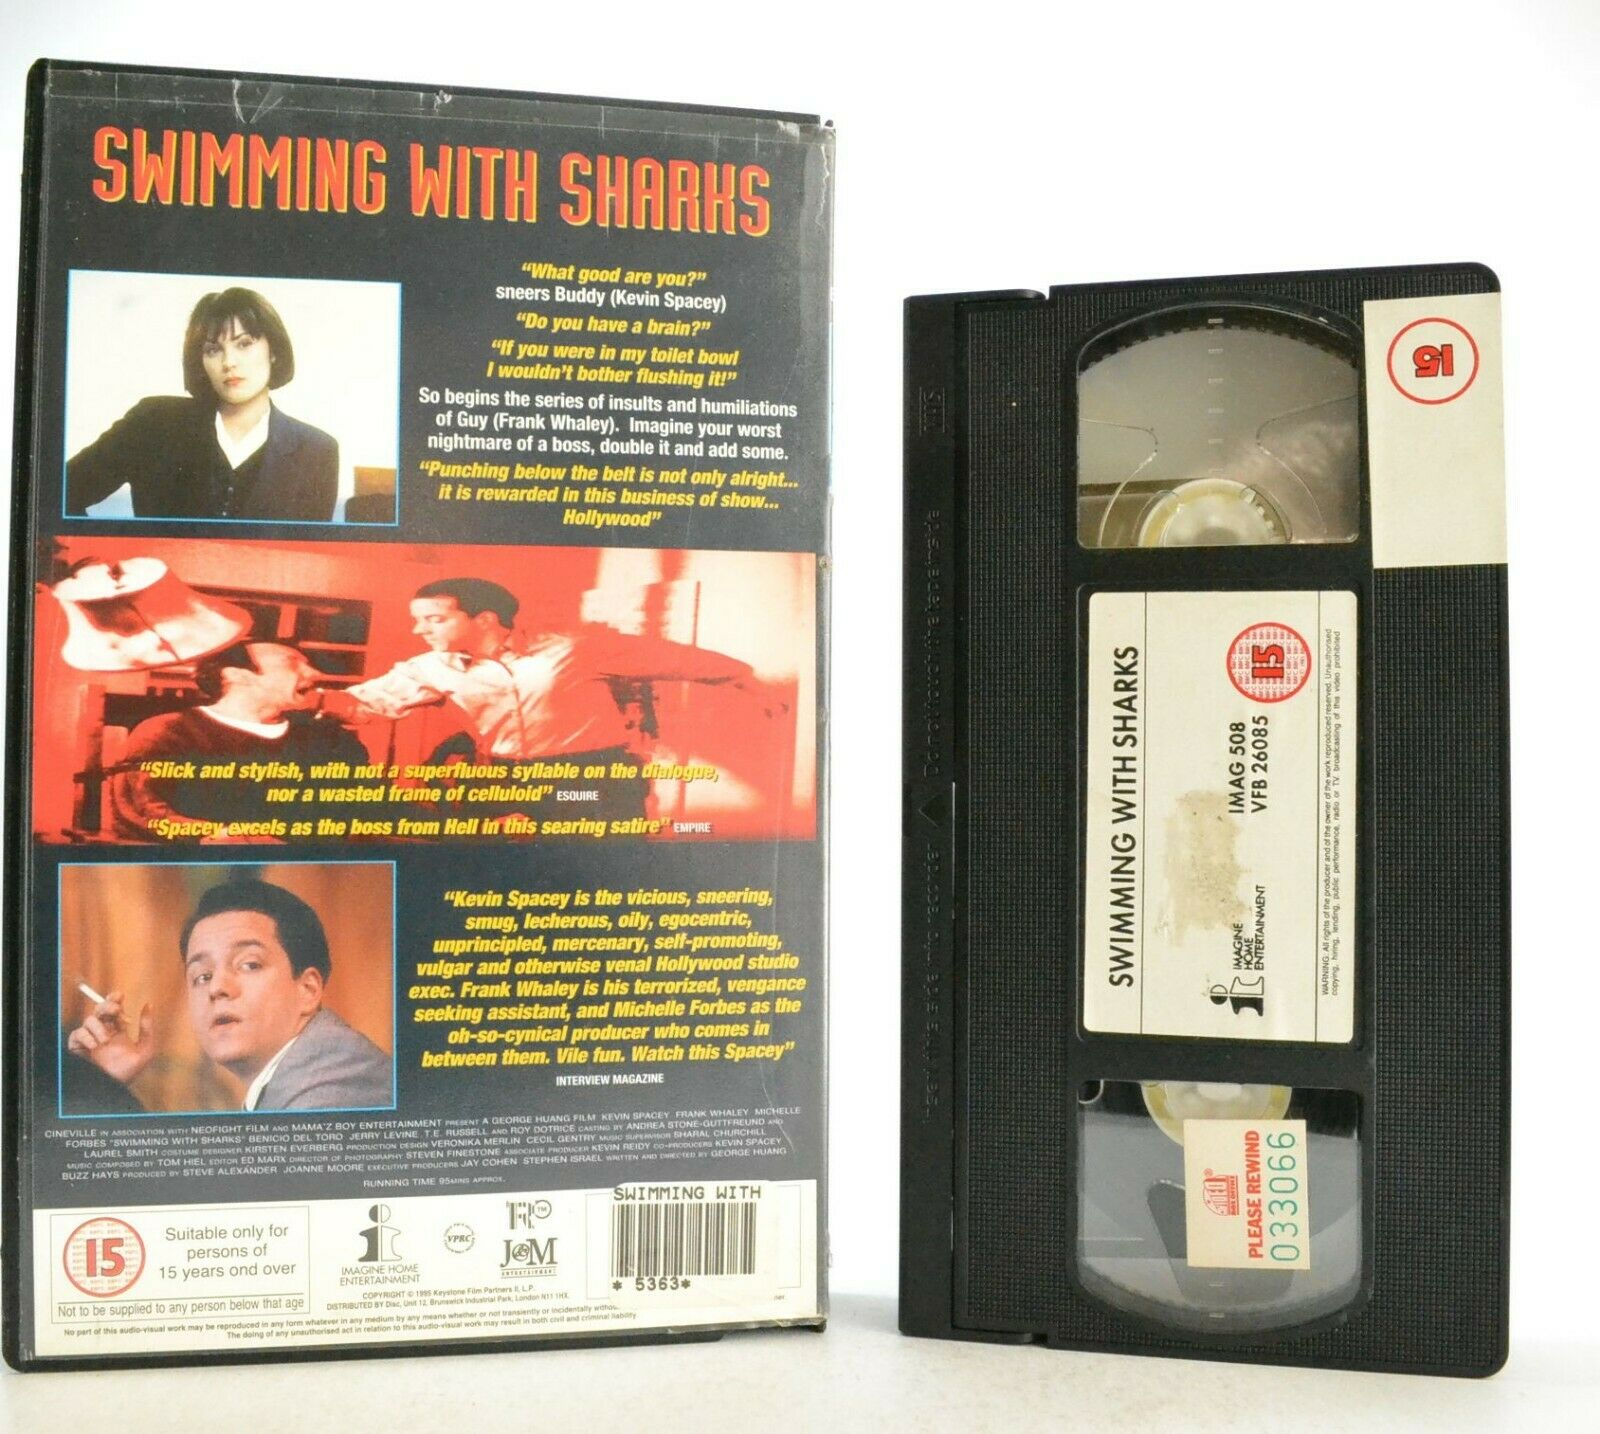 Swimming With Sharks: Comedy Drama (1994) - Large Box - K.Spacey/F.Whaley - VHS-